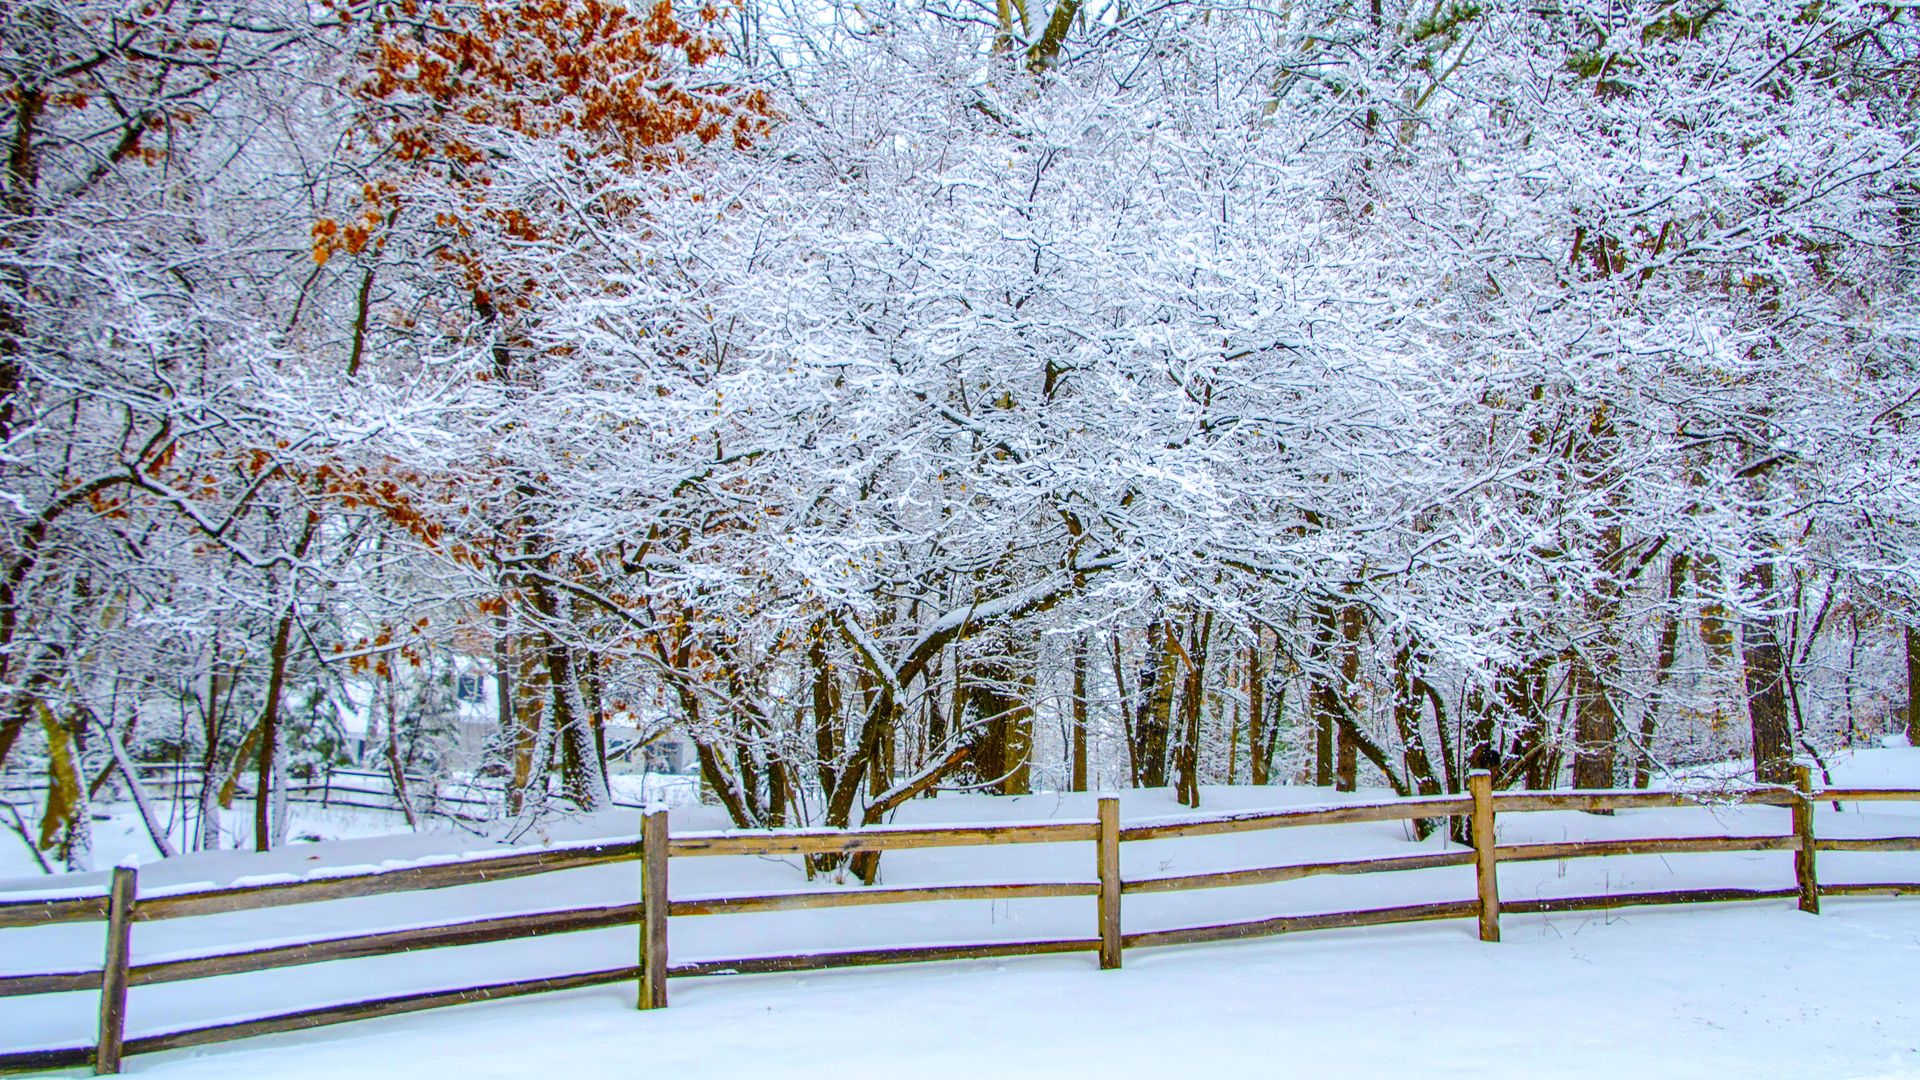 trees and fence covered in snow